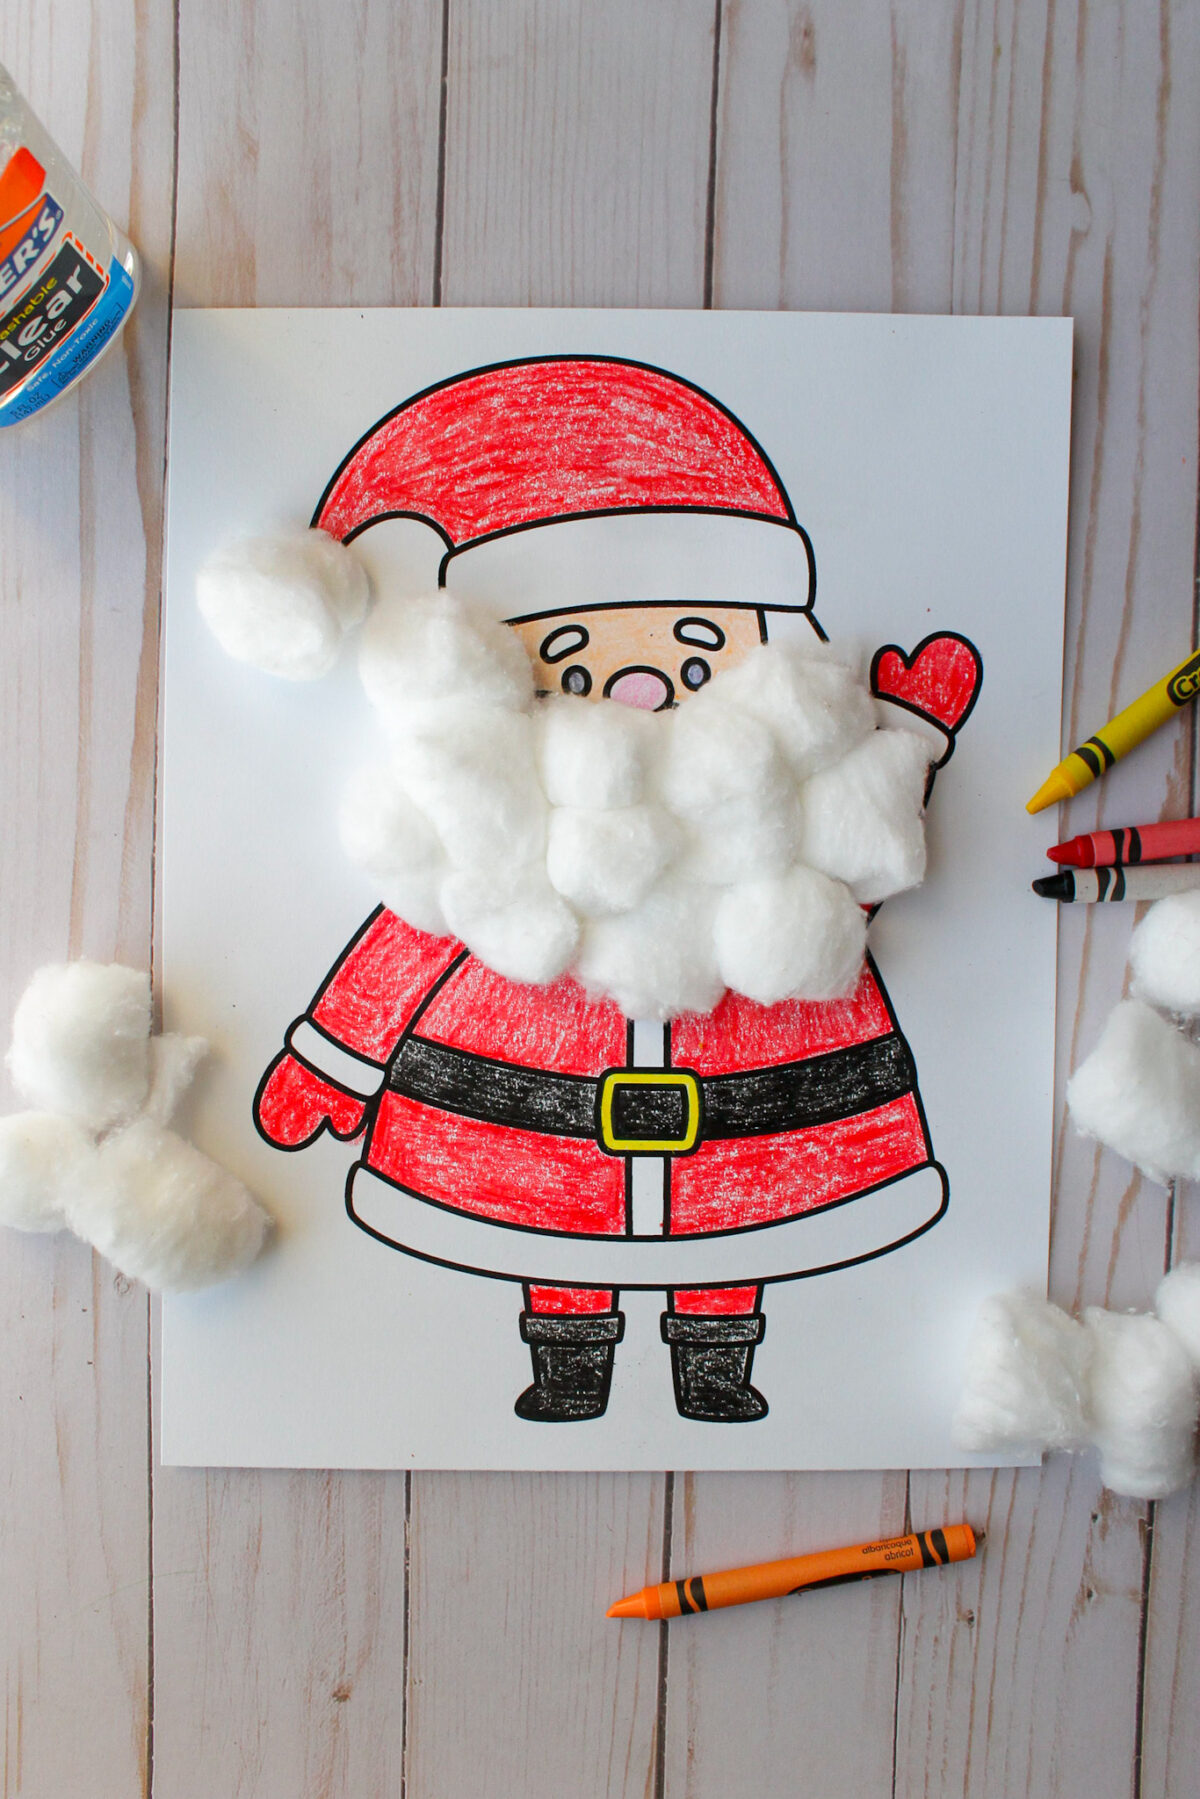 Full Santa body to color and use as a Christmas countdown by adding cotton to his beard